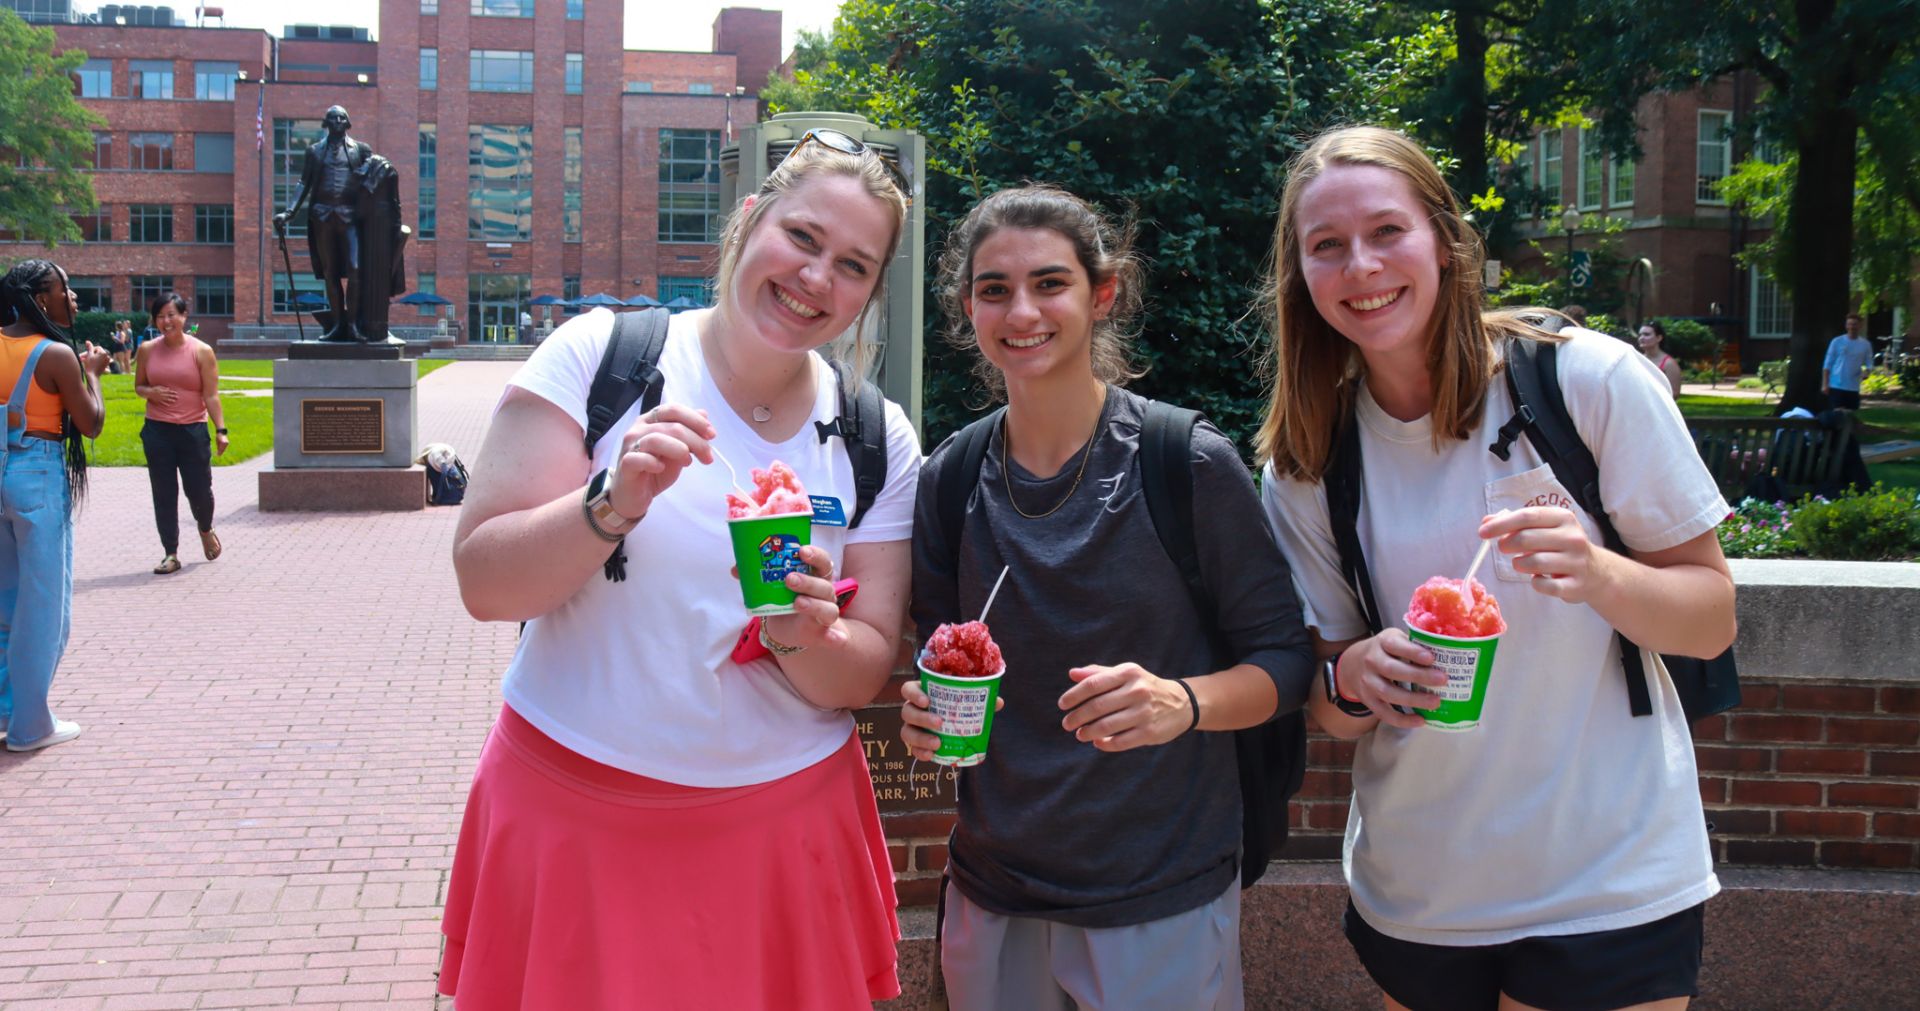 students smiling in university yard with kona ice